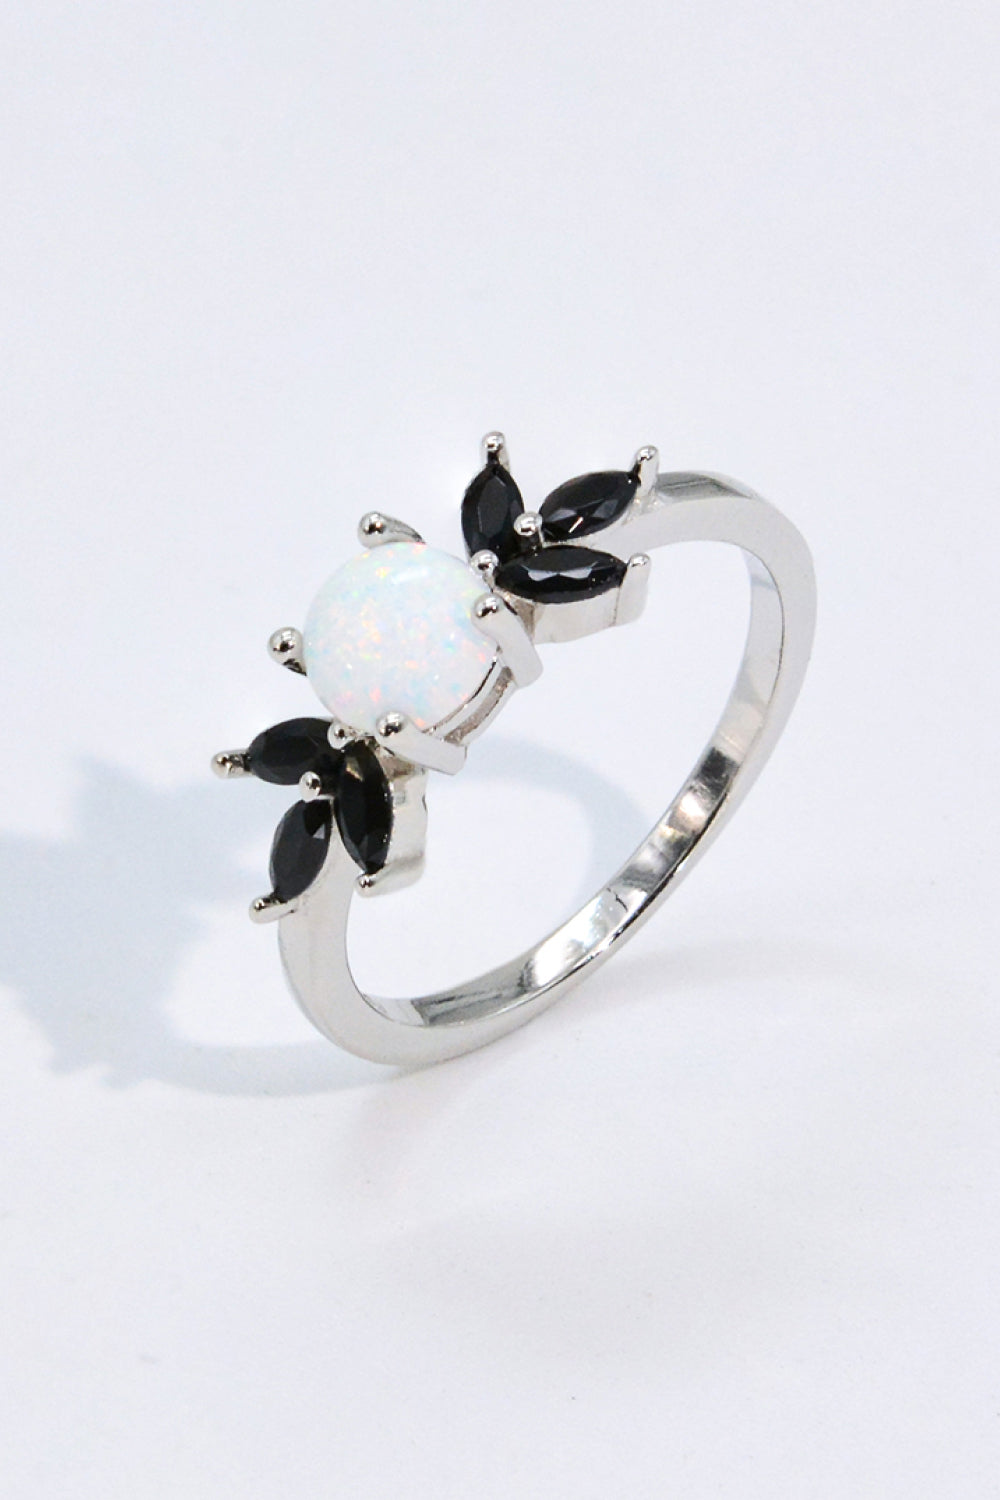 Opal and Zircon Contrast Ring - Tophatter Shopping Deals - Electronics, Jewelry, Auction, App, Bidding, Gadgets, Fashion